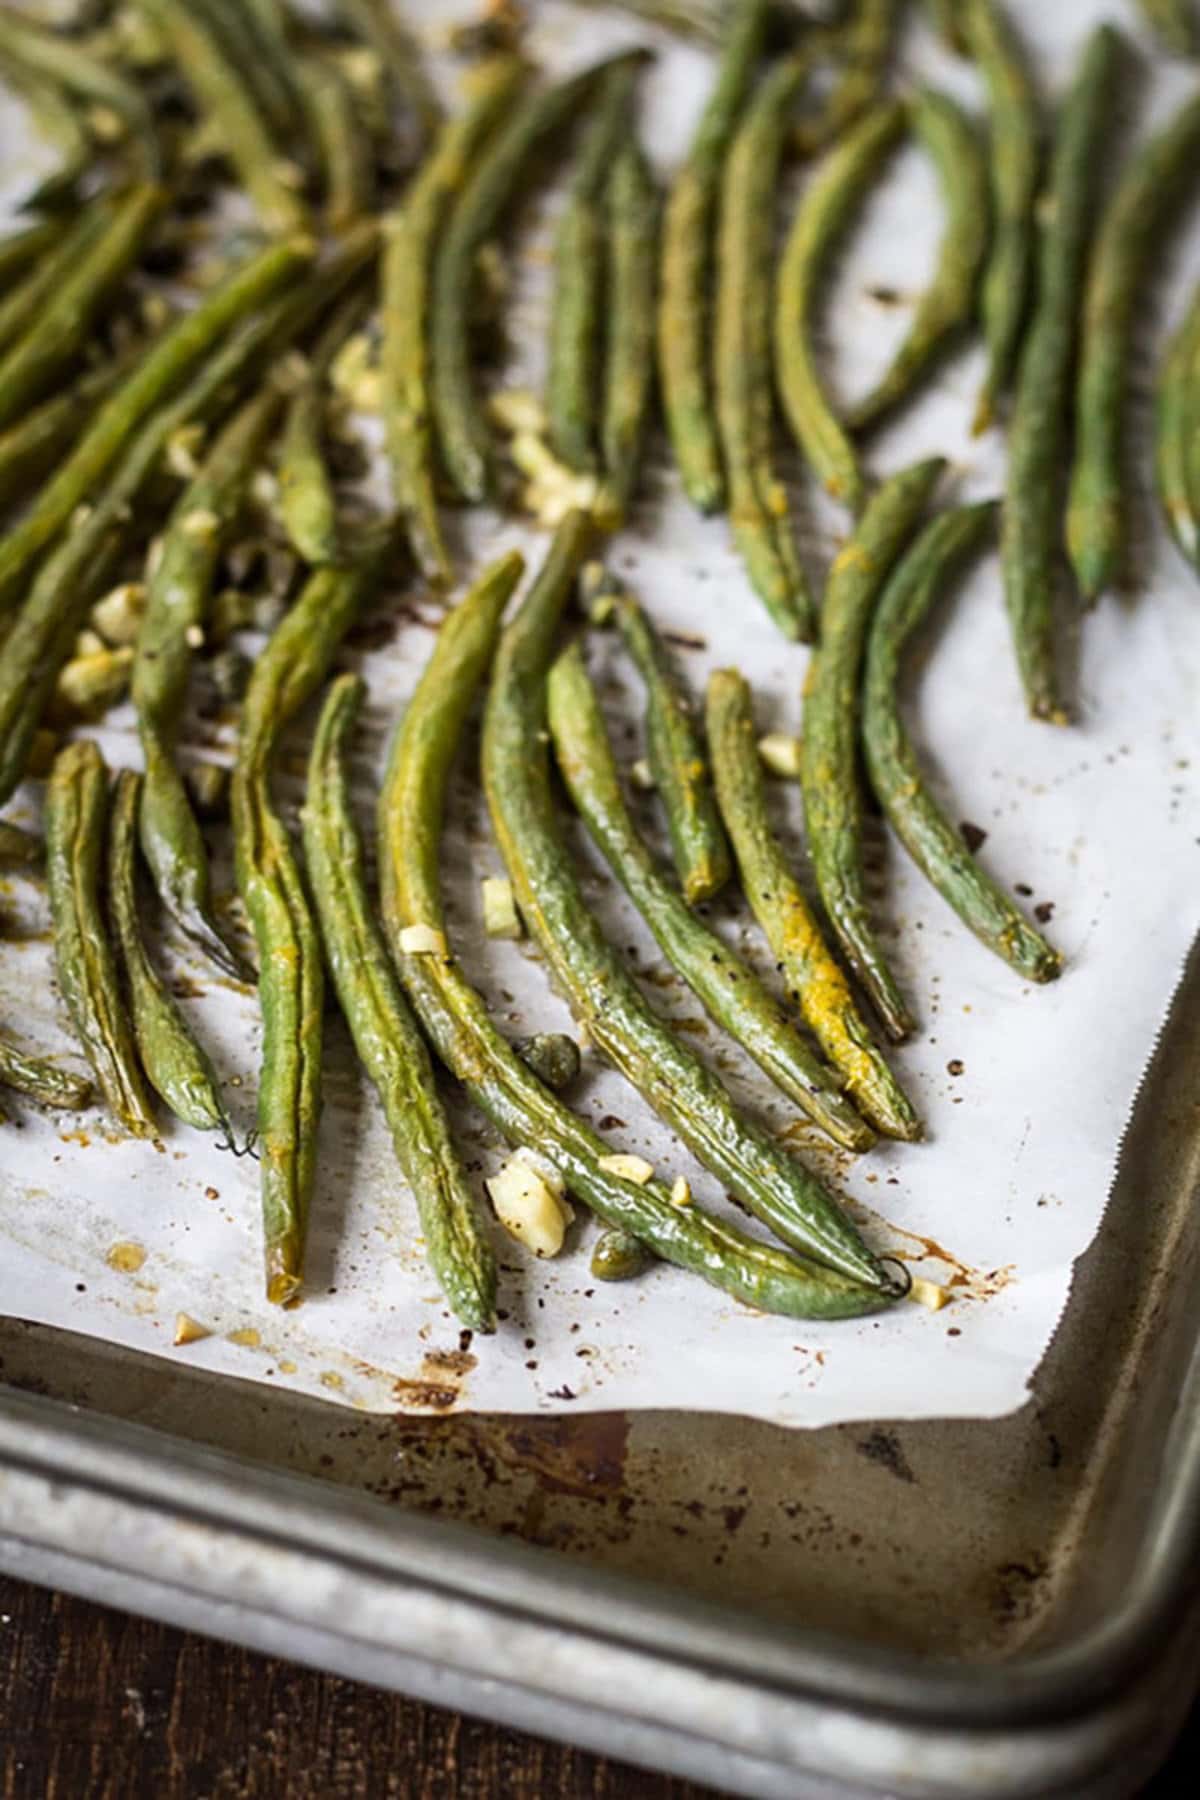 Oven Roasted Green Beans on parchment paper on a baking sheet.